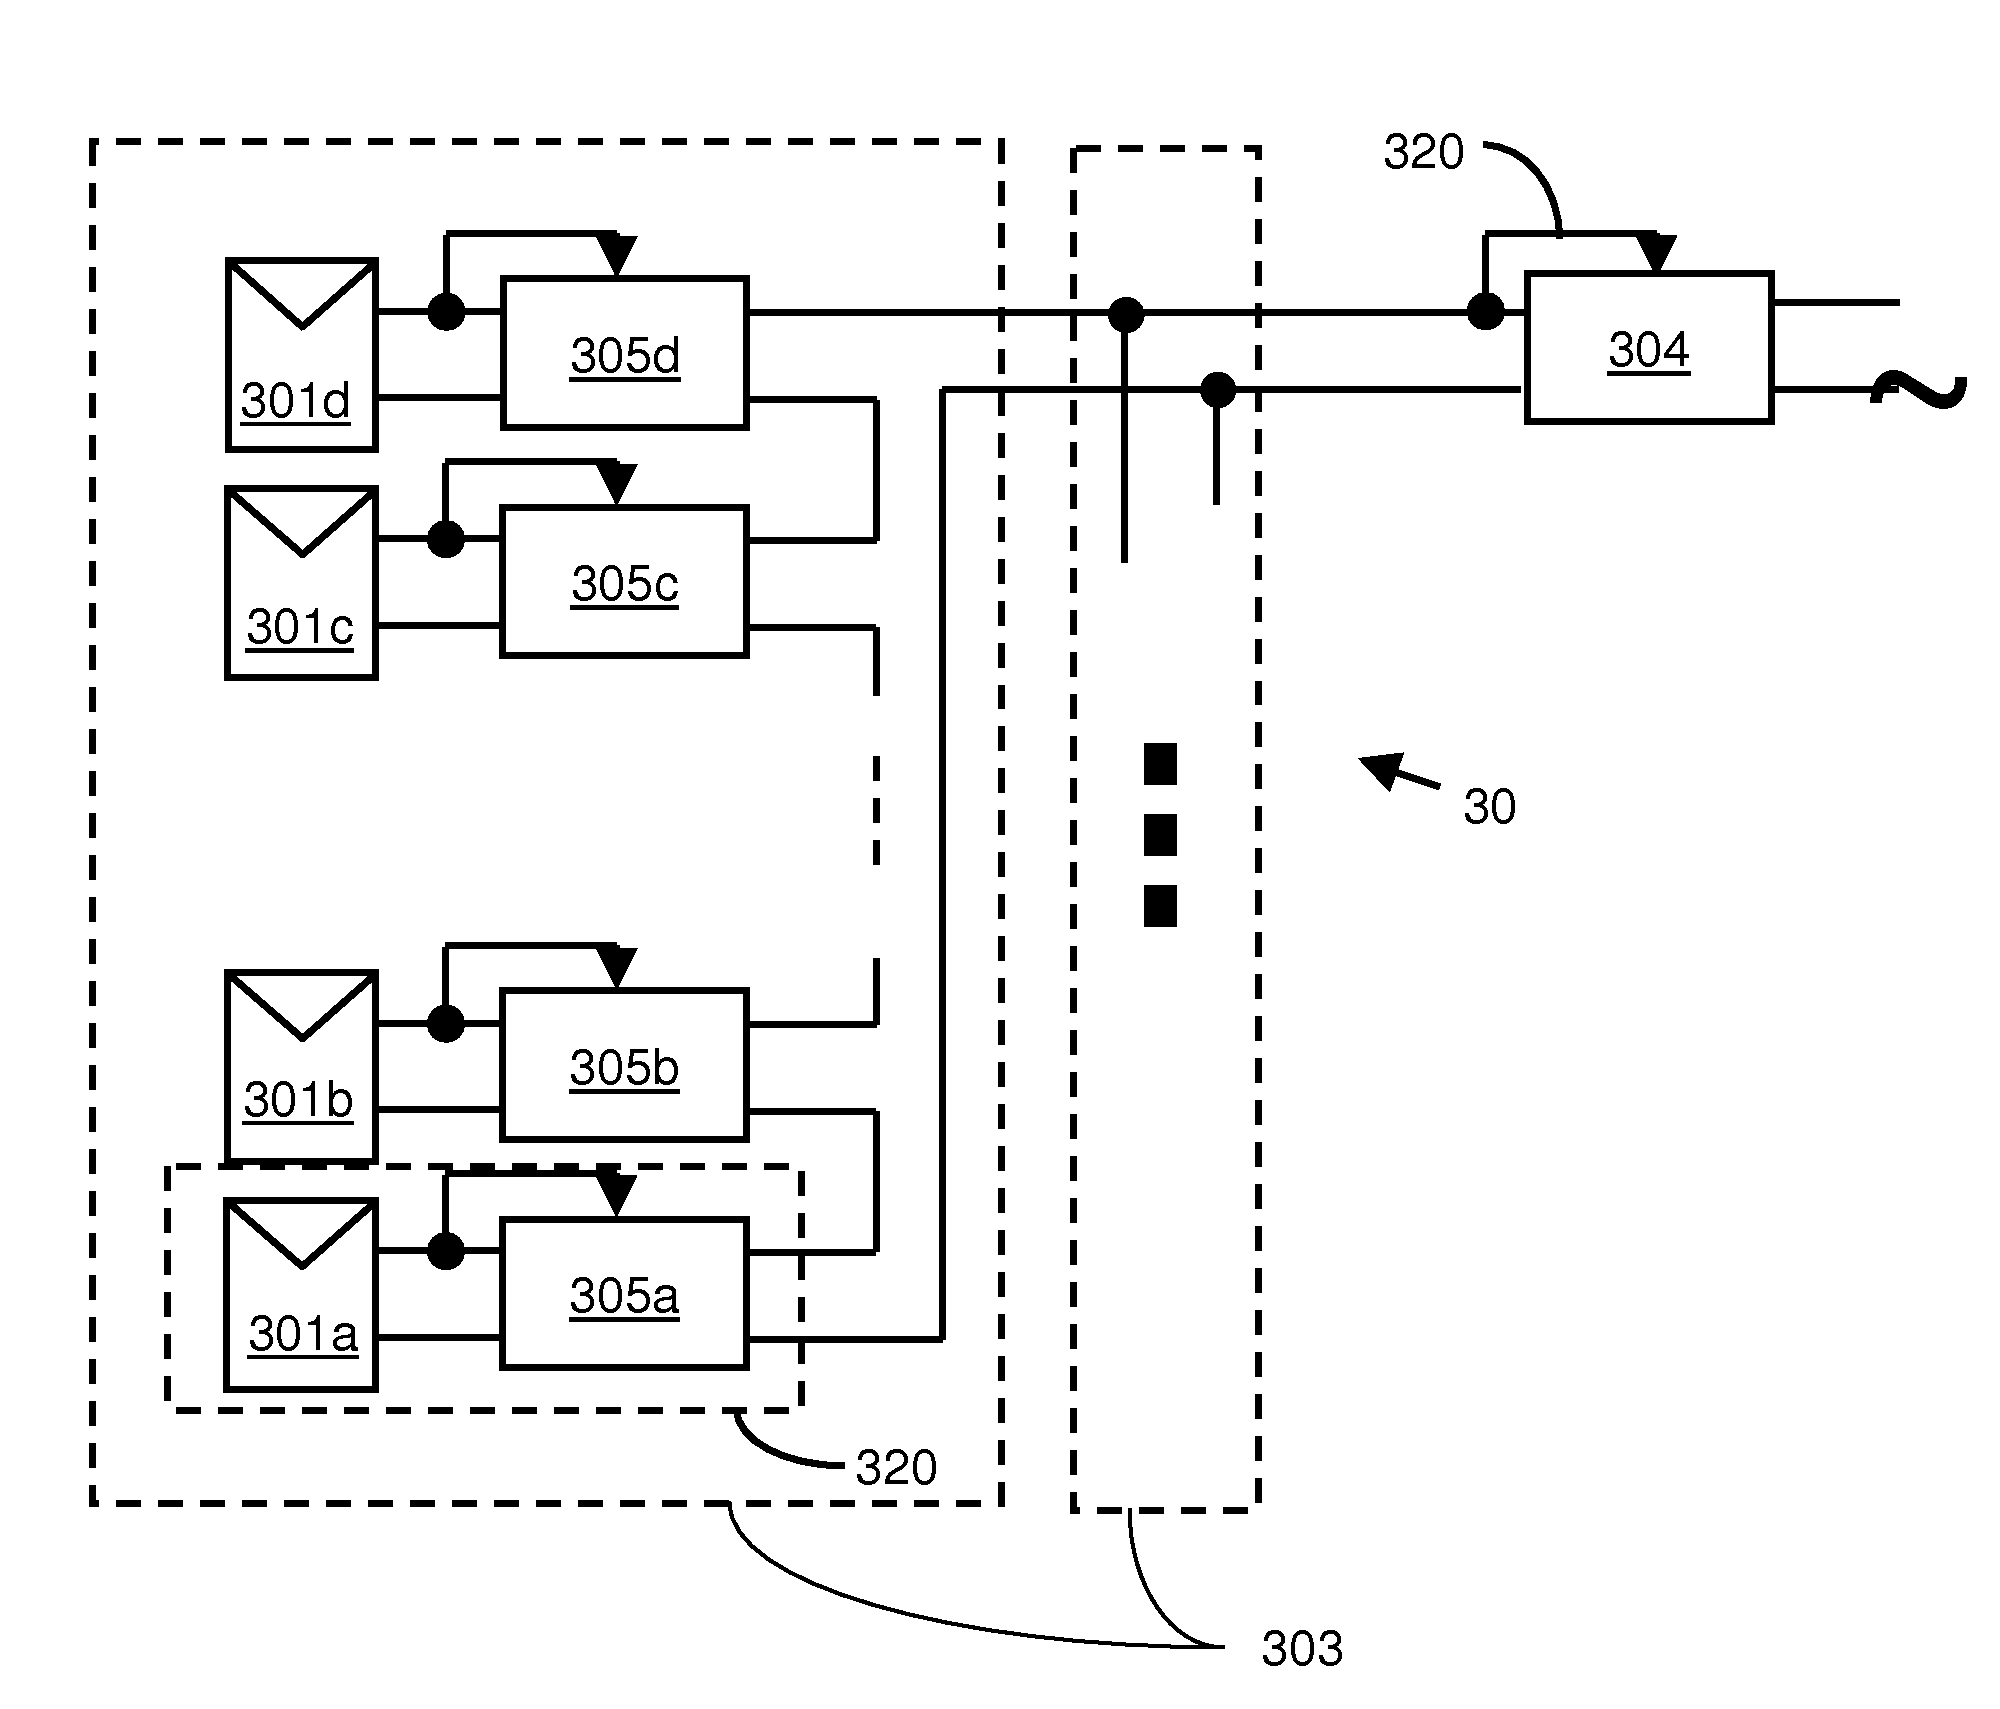 Distributed power harvesting systems using DC power sources